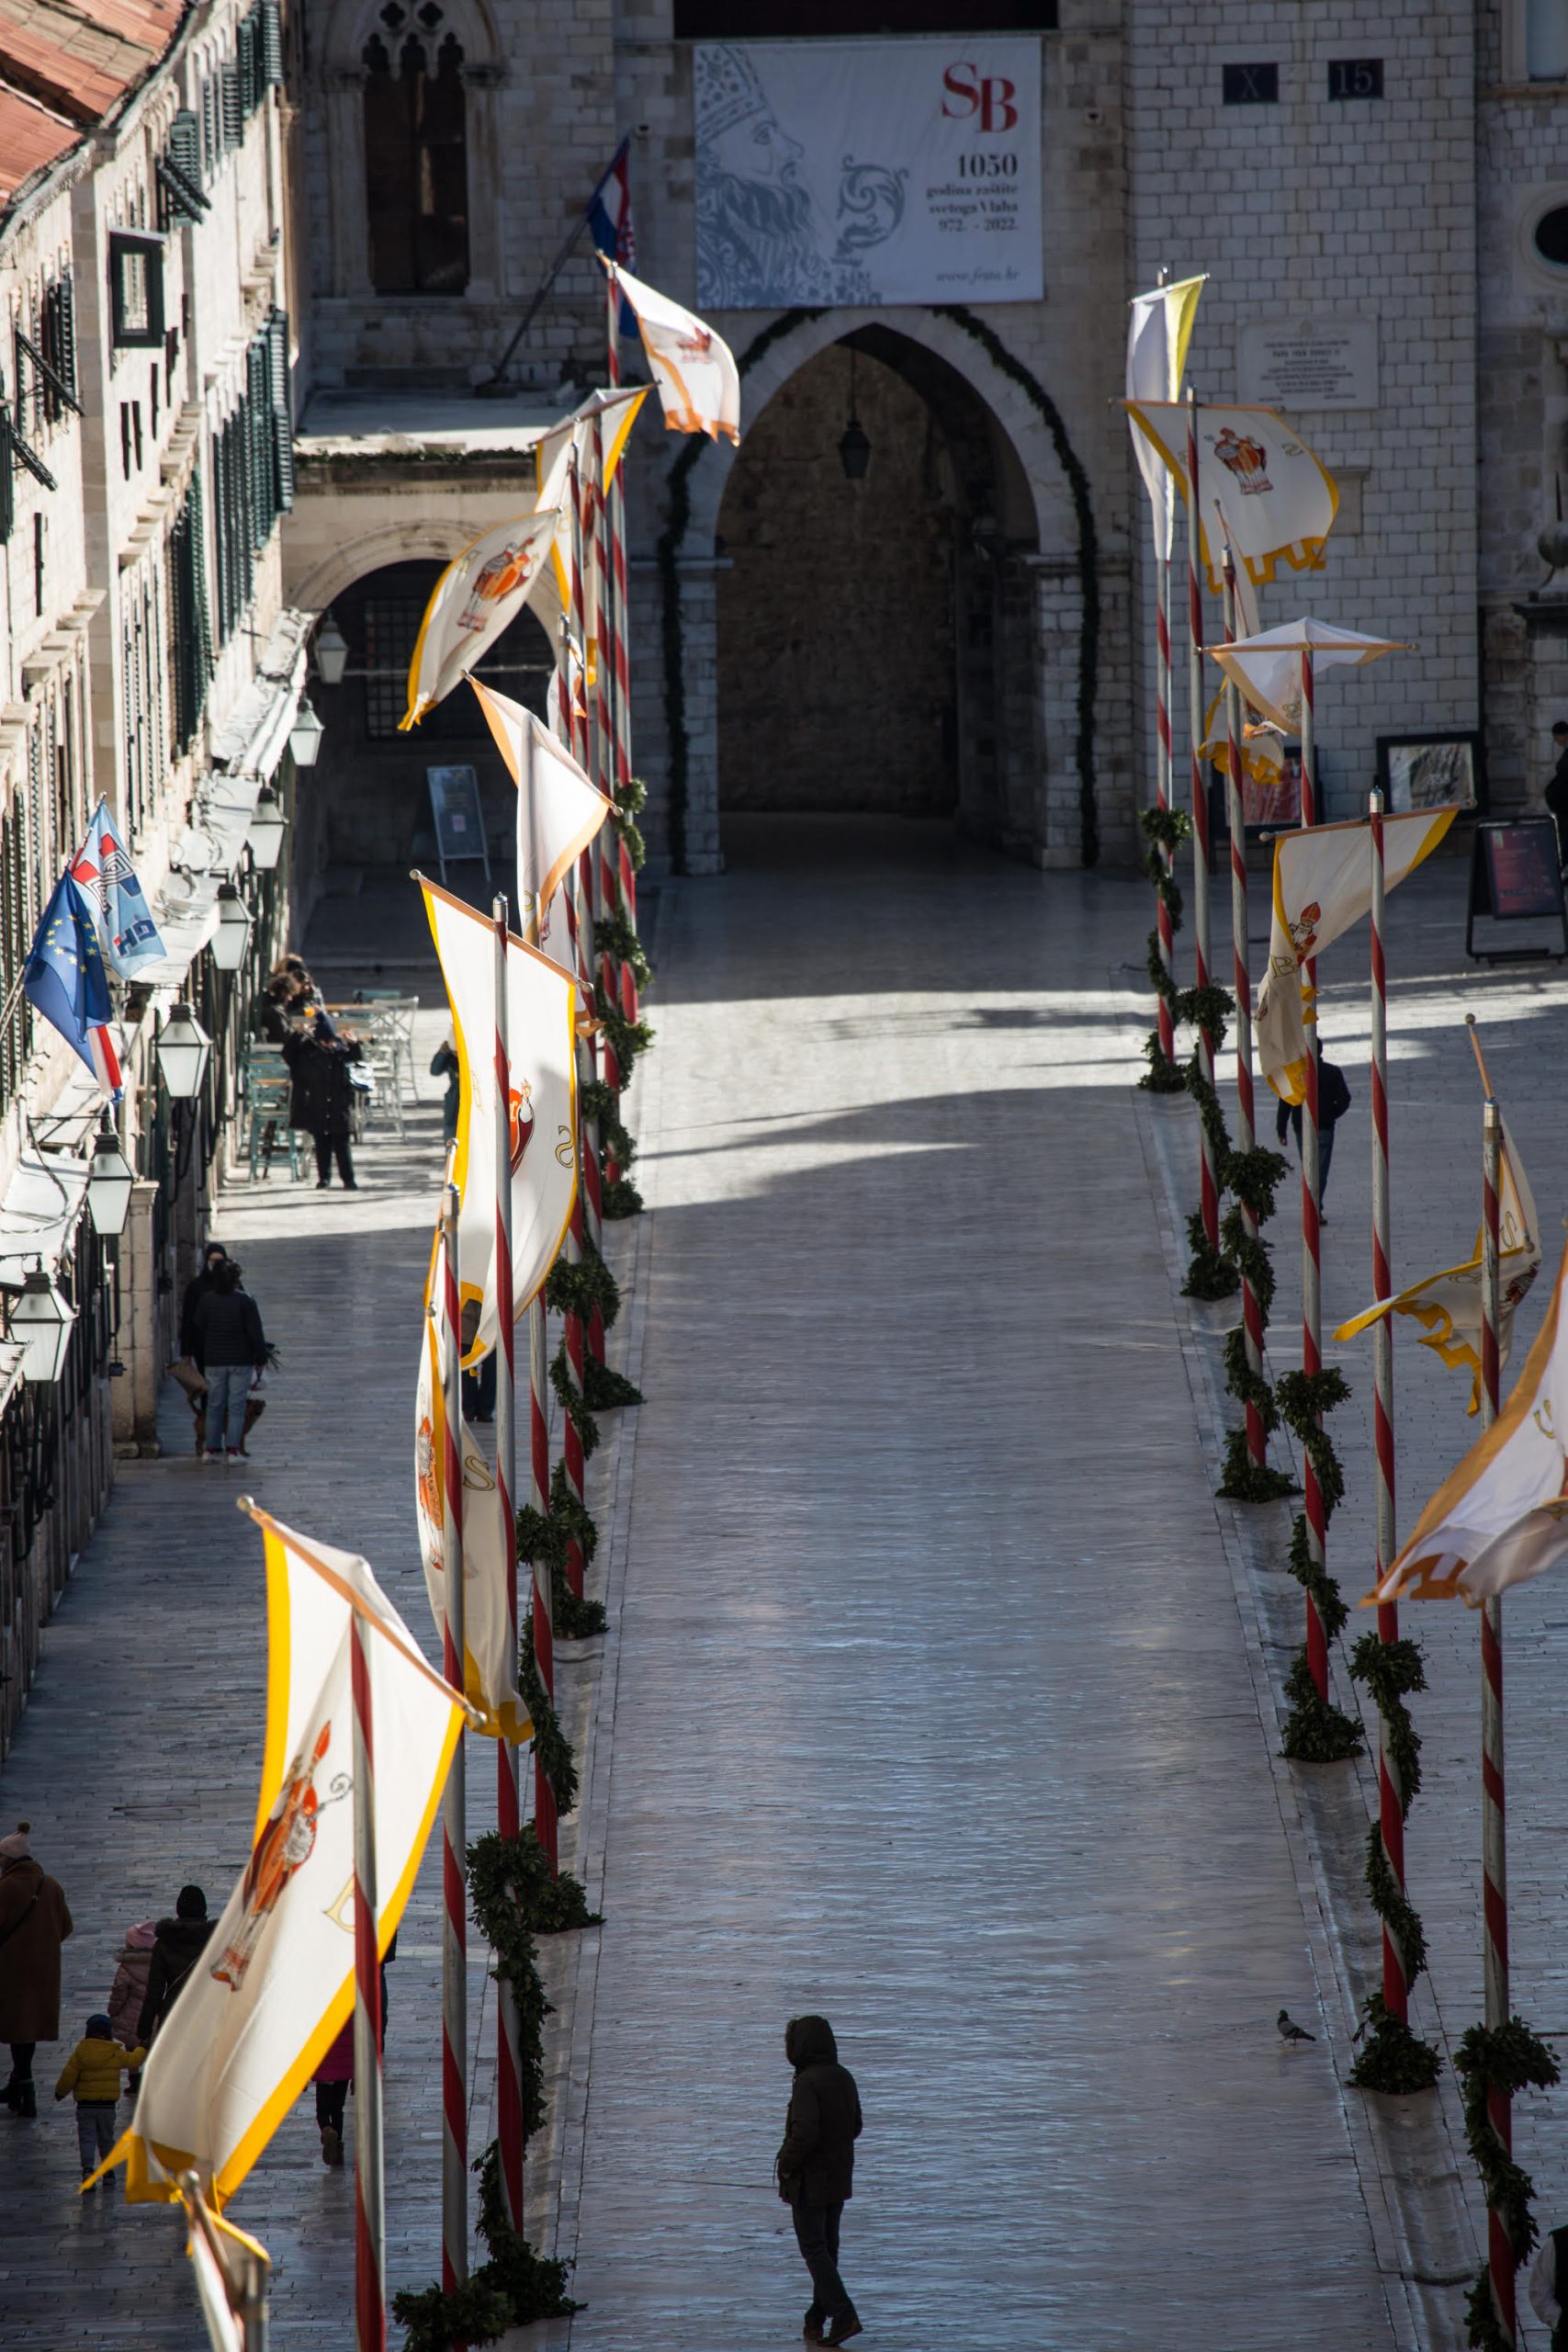 Dubrovnik’s day: Feast of Saint Blaise celebrated for 1050th time today